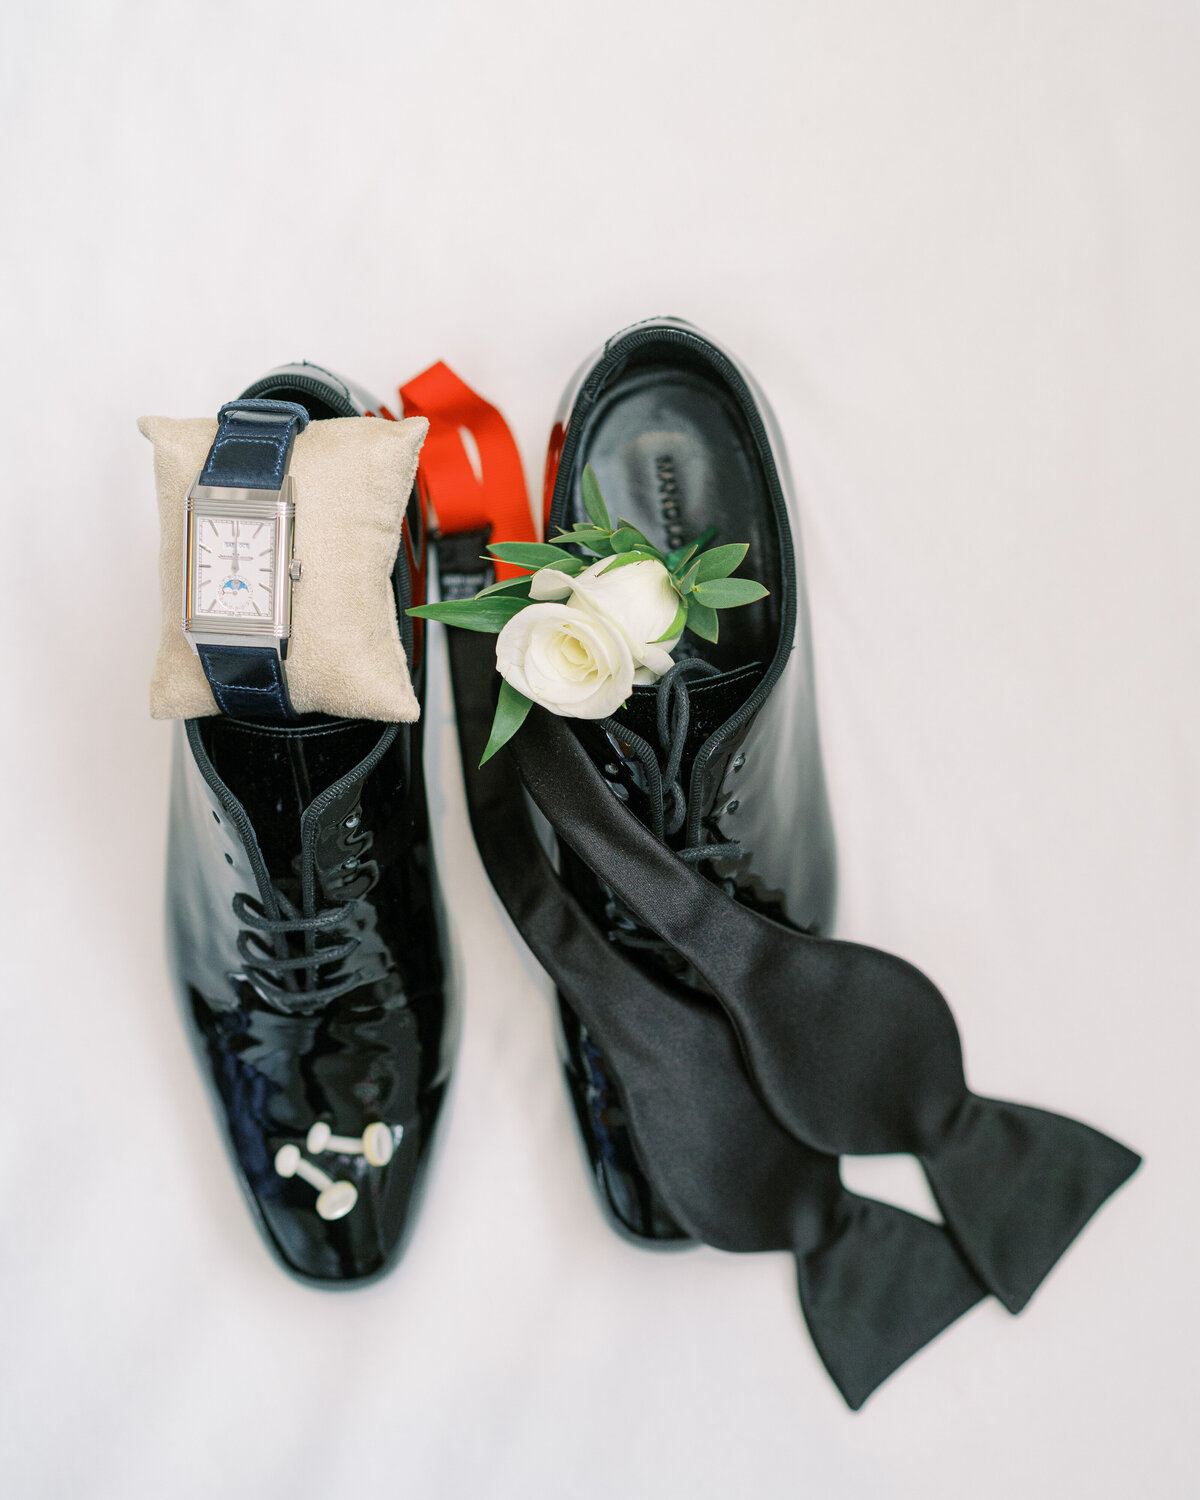 Groom's shoes and wedding accessories for black tie wedding on the Monkey Island Estate